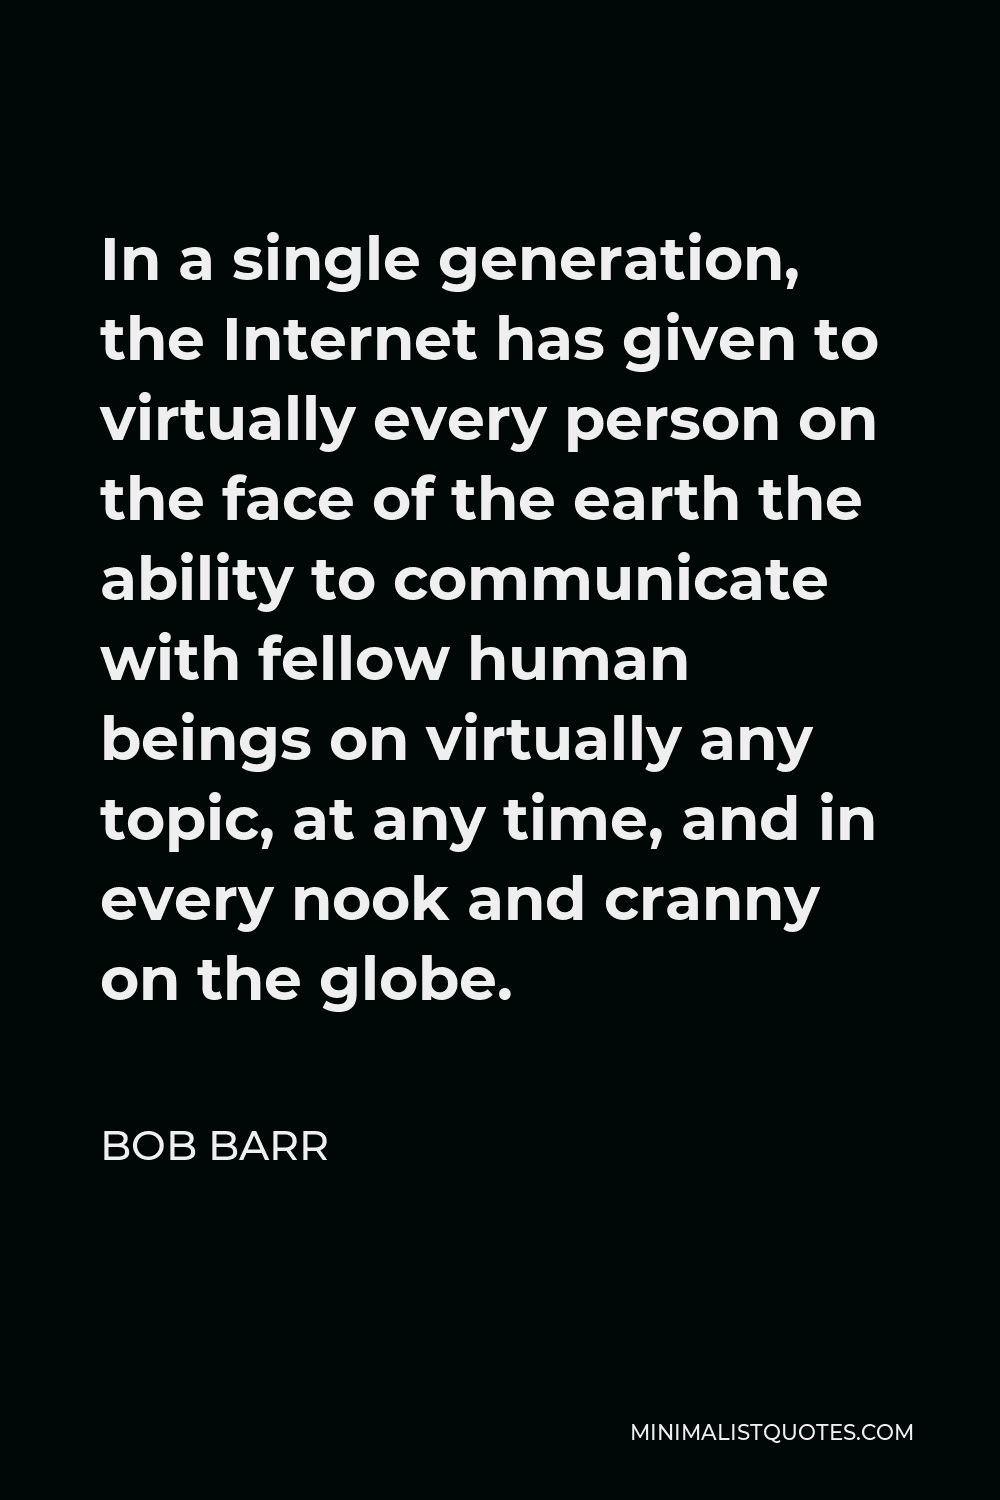 Bob Barr Quote - In a single generation, the Internet has given to virtually every person on the face of the earth the ability to communicate with fellow human beings on virtually any topic, at any time, and in every nook and cranny on the globe.